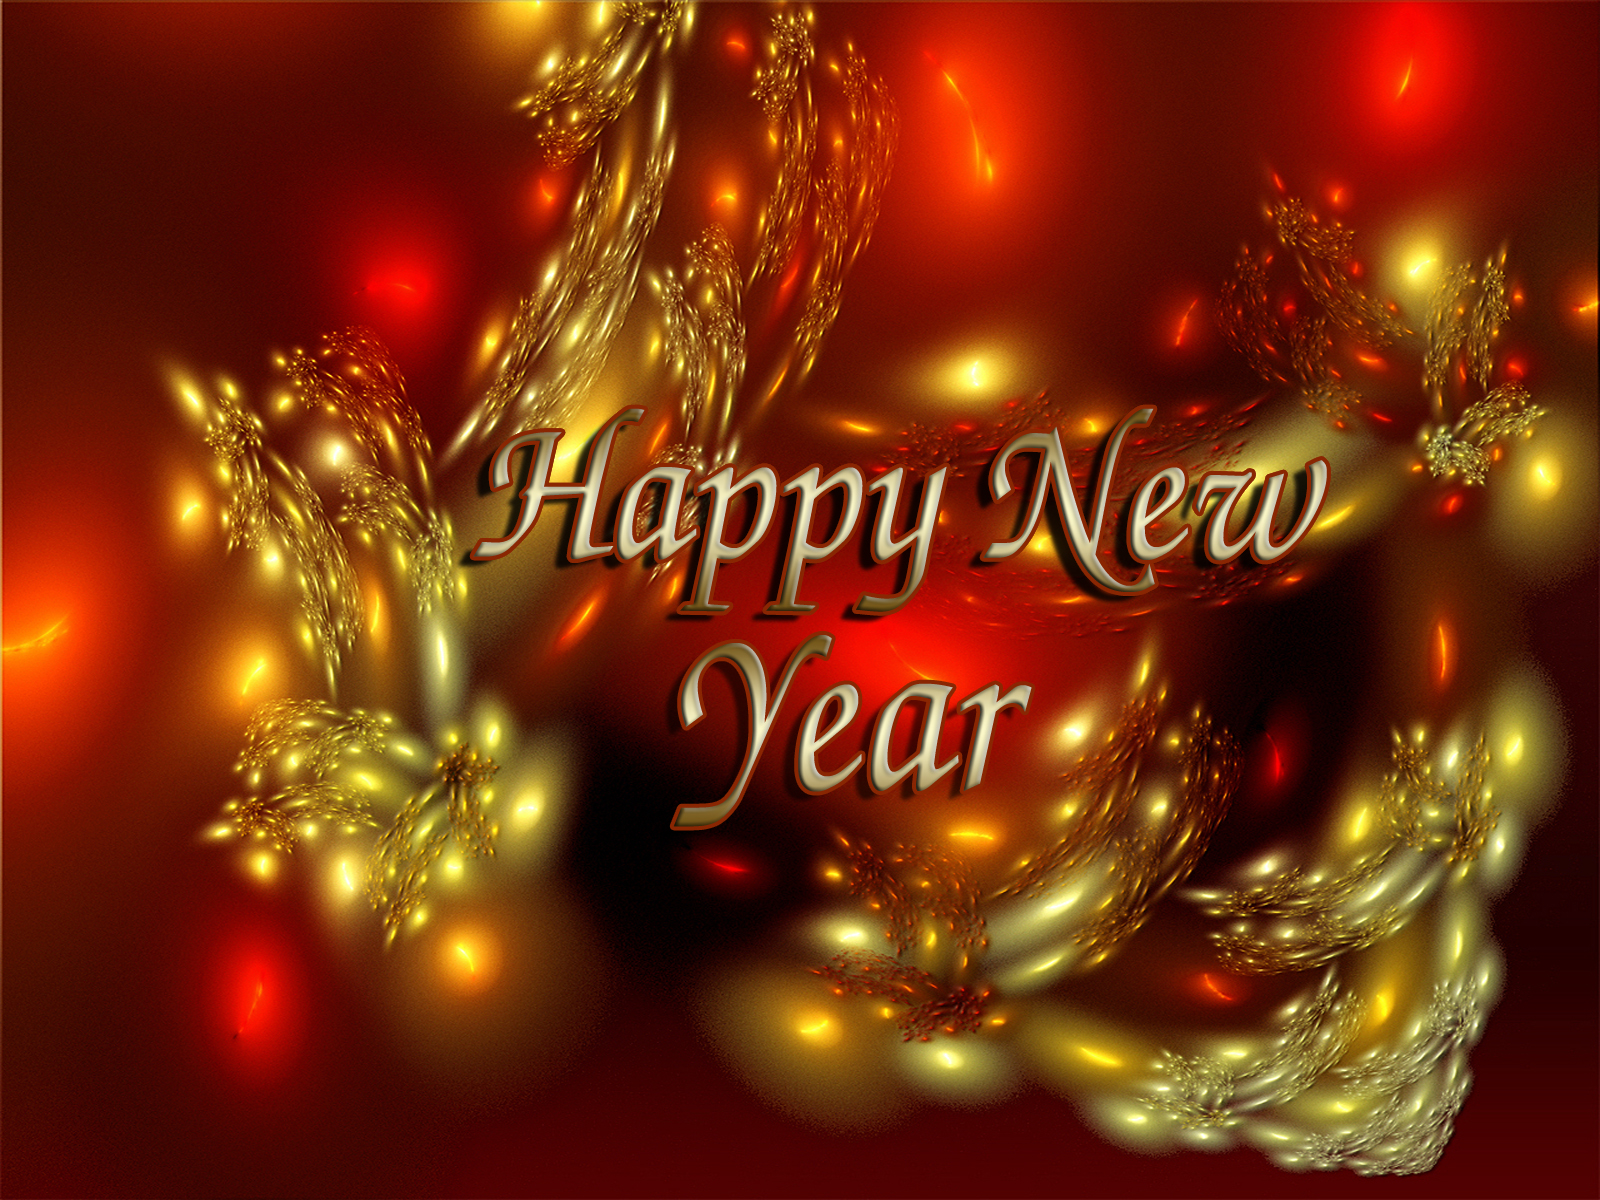 Happy new year wallpapers is a great thing to in new year wallpapers 1600x1200